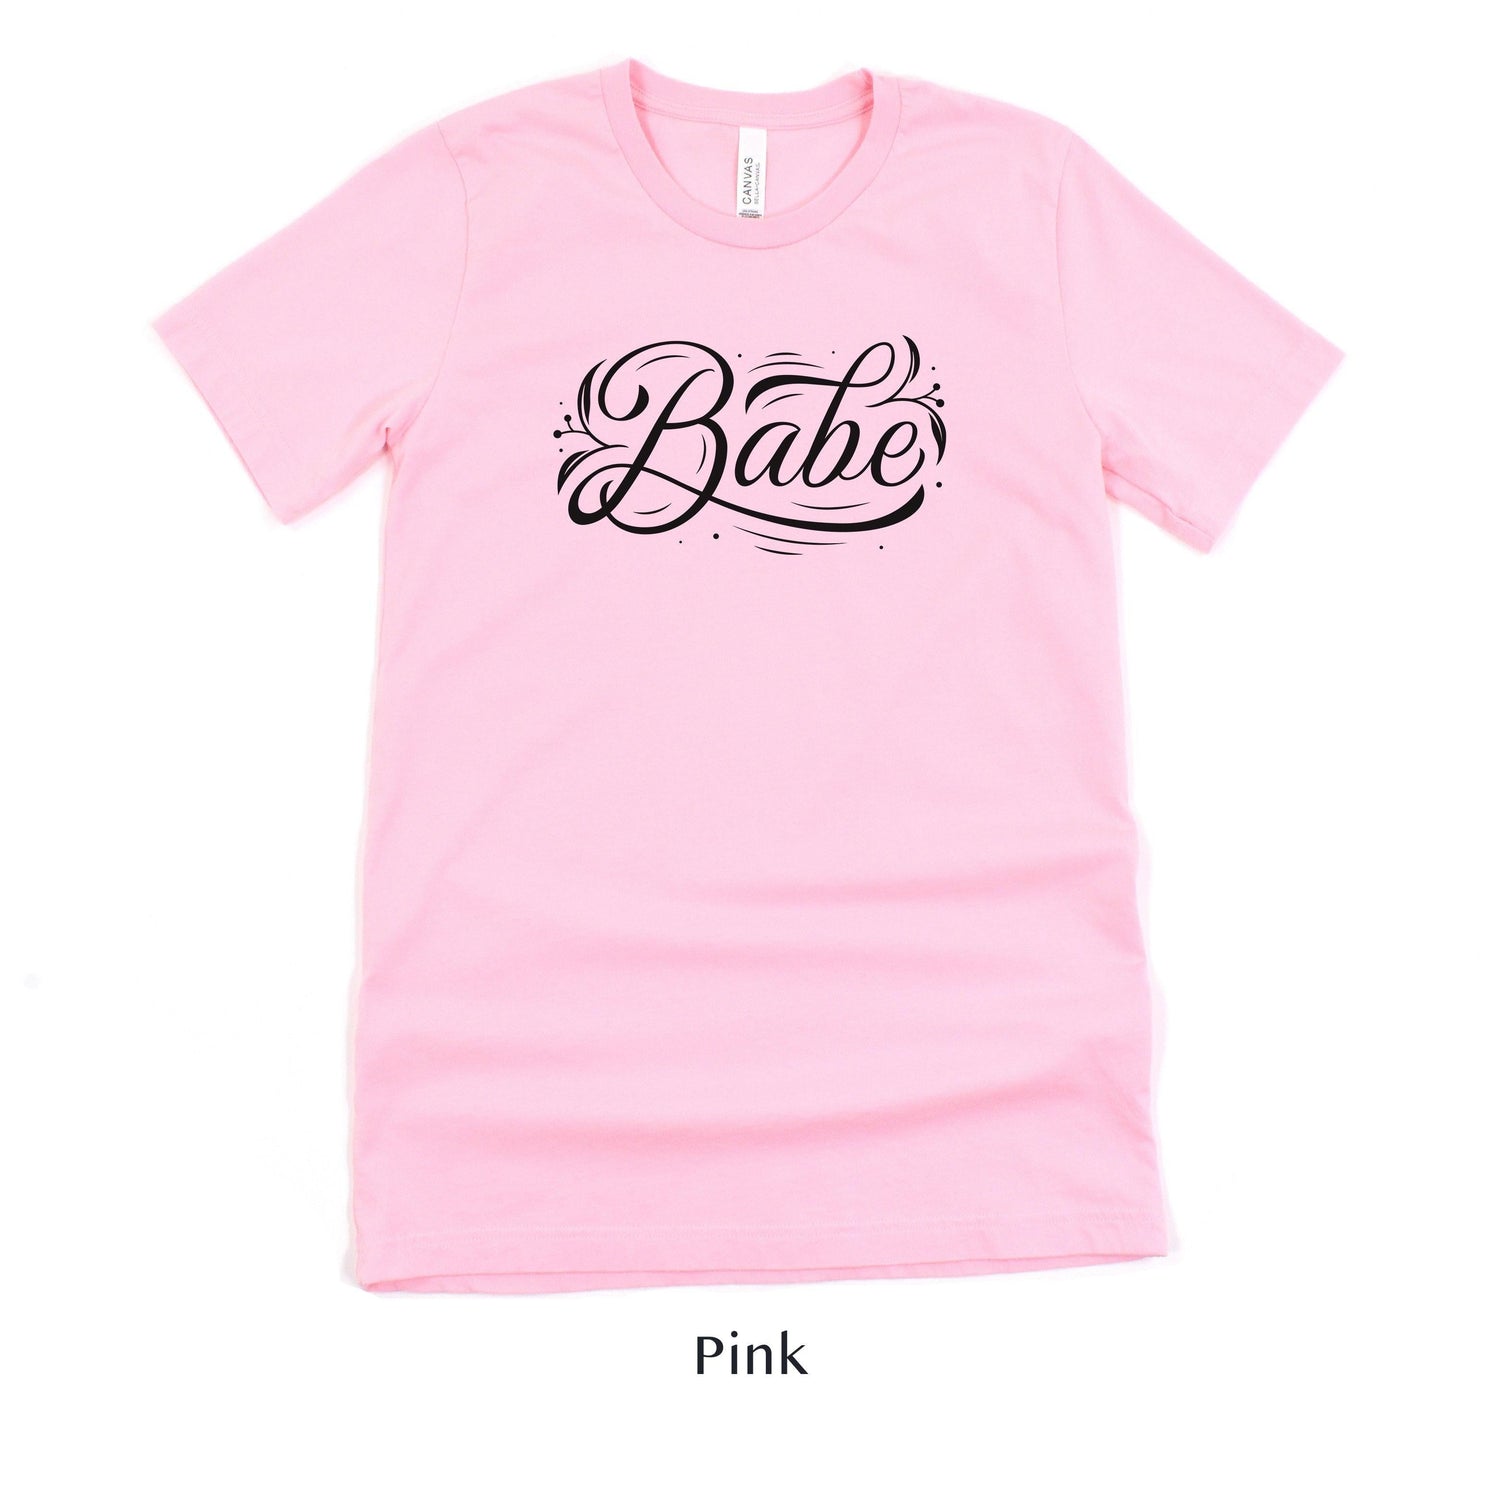 Babe Short-Sleeve Tee - Bach Weekend and Bridal Proposal Box Shirt - Plus Sizes Available! by Oaklynn Lane - pink tshirt